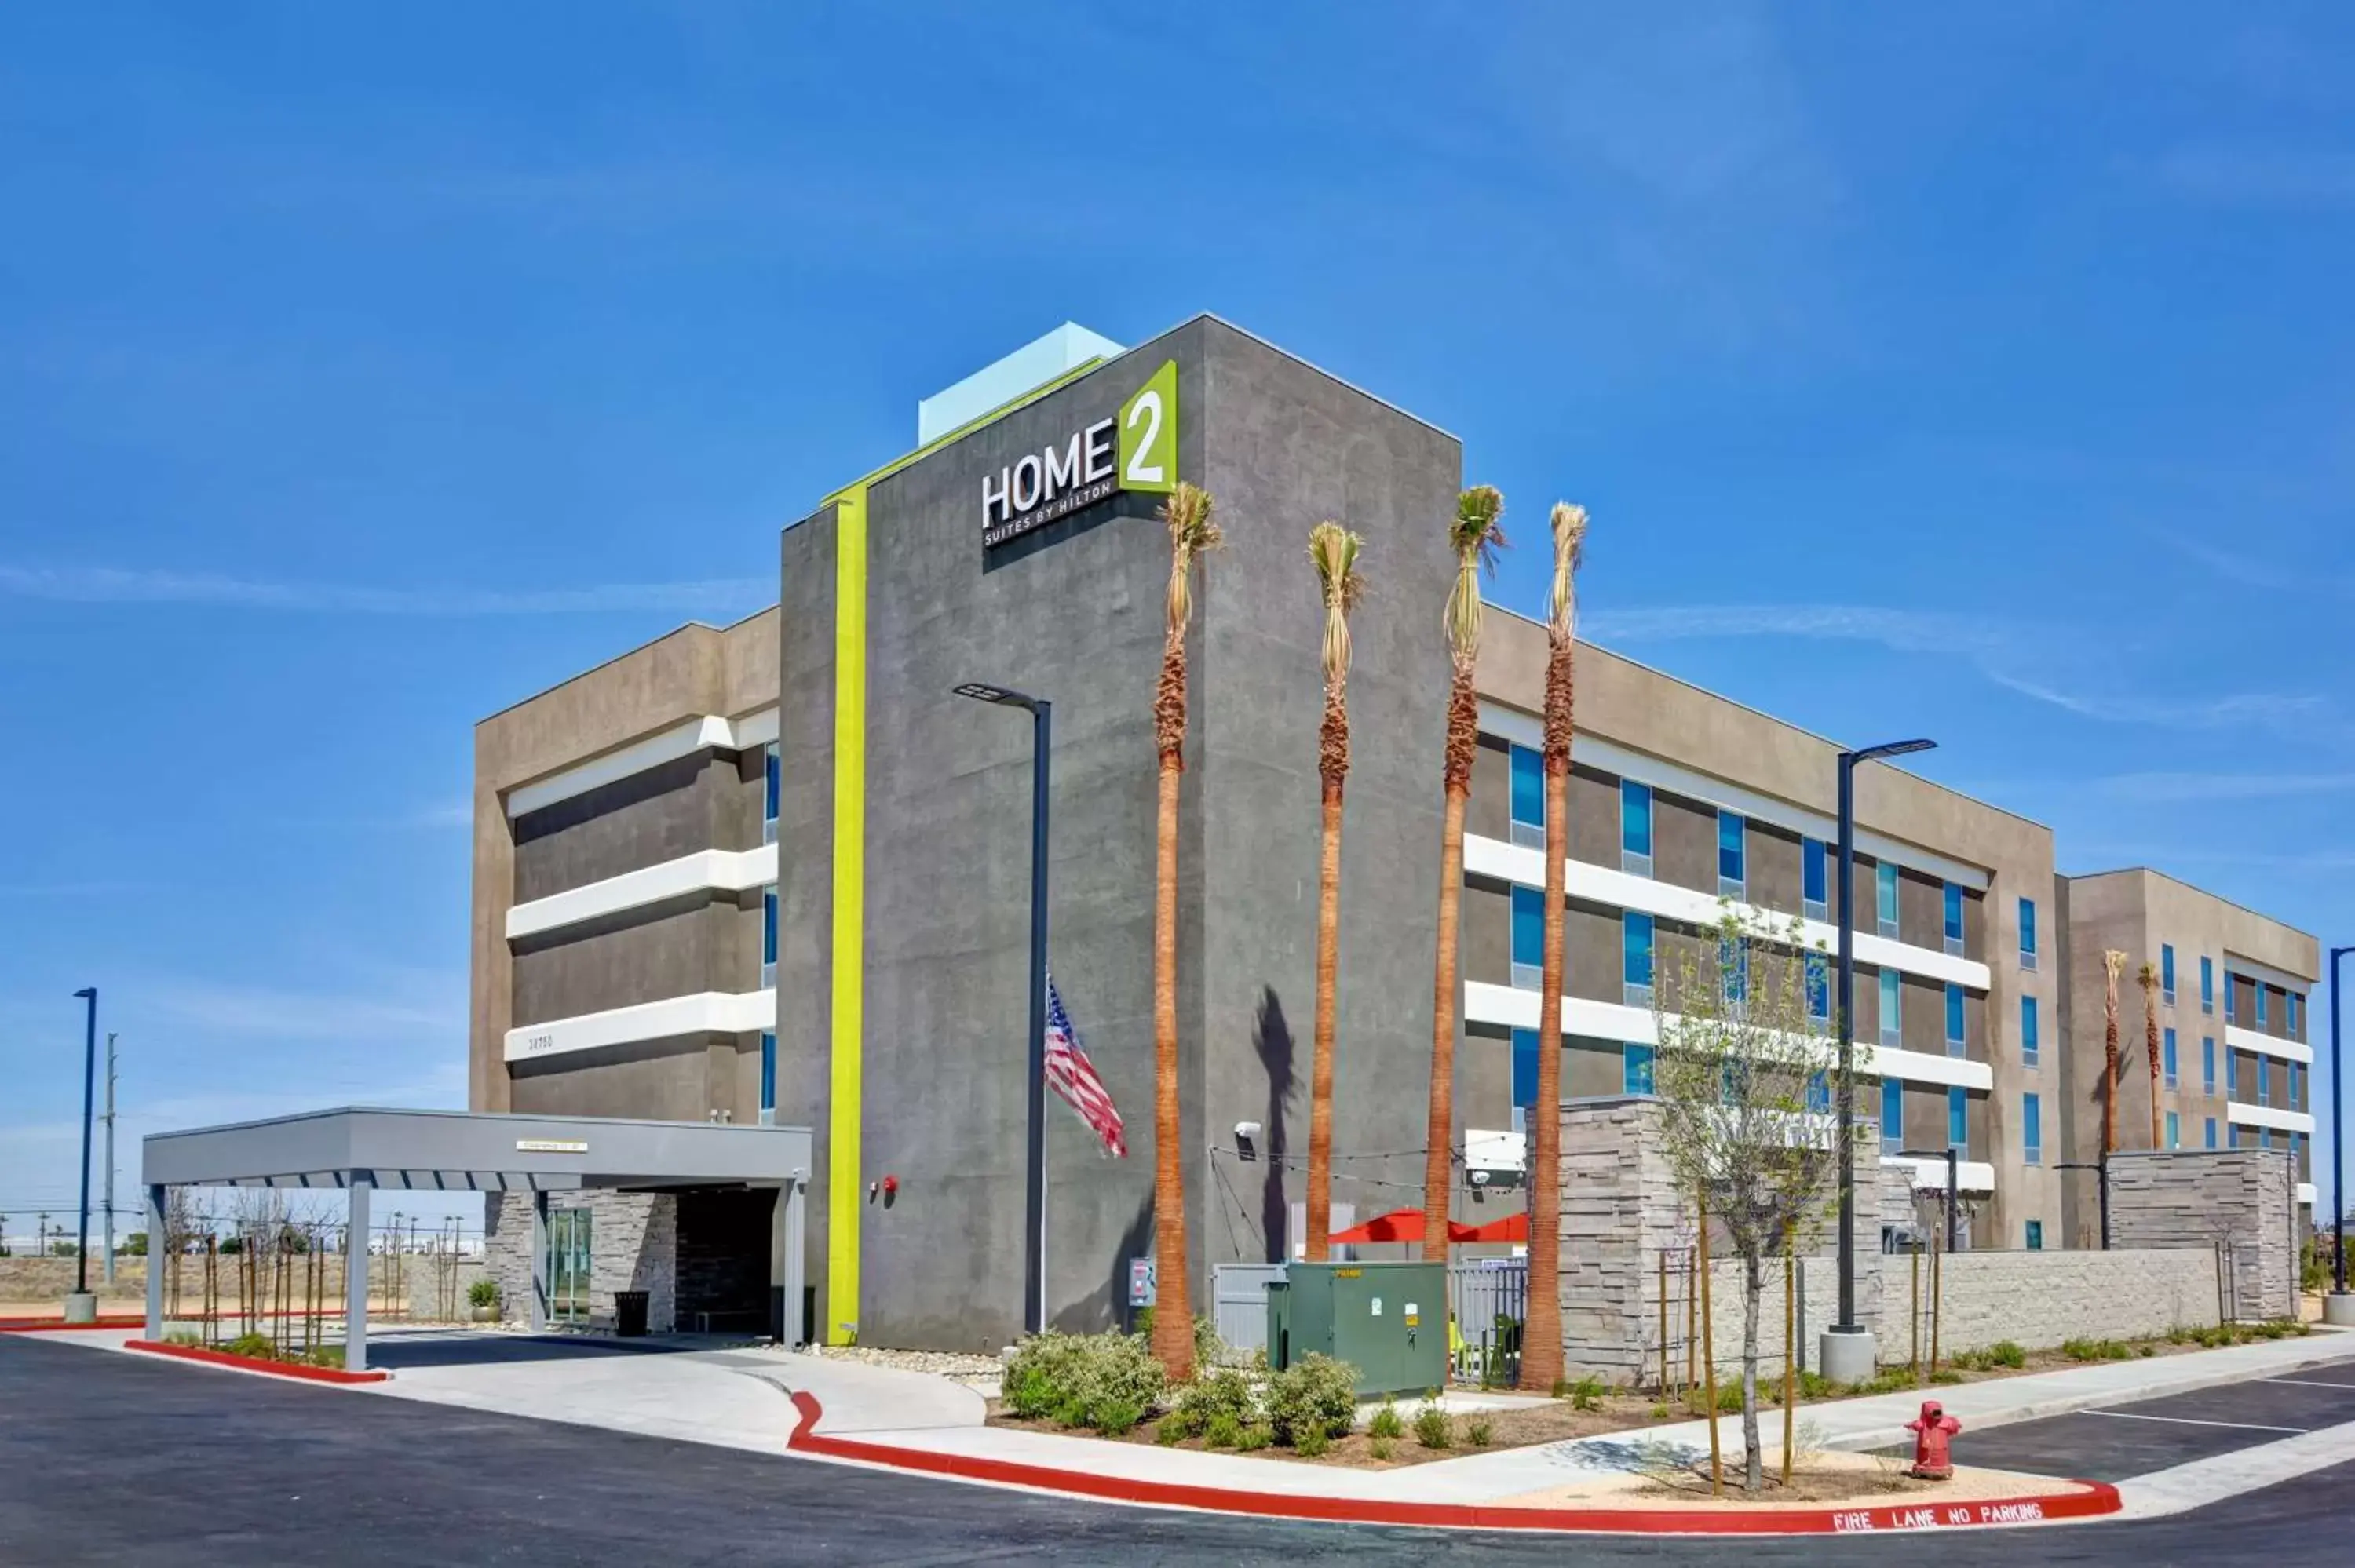 Property Building in Home2 Suites By Hilton Palmdale